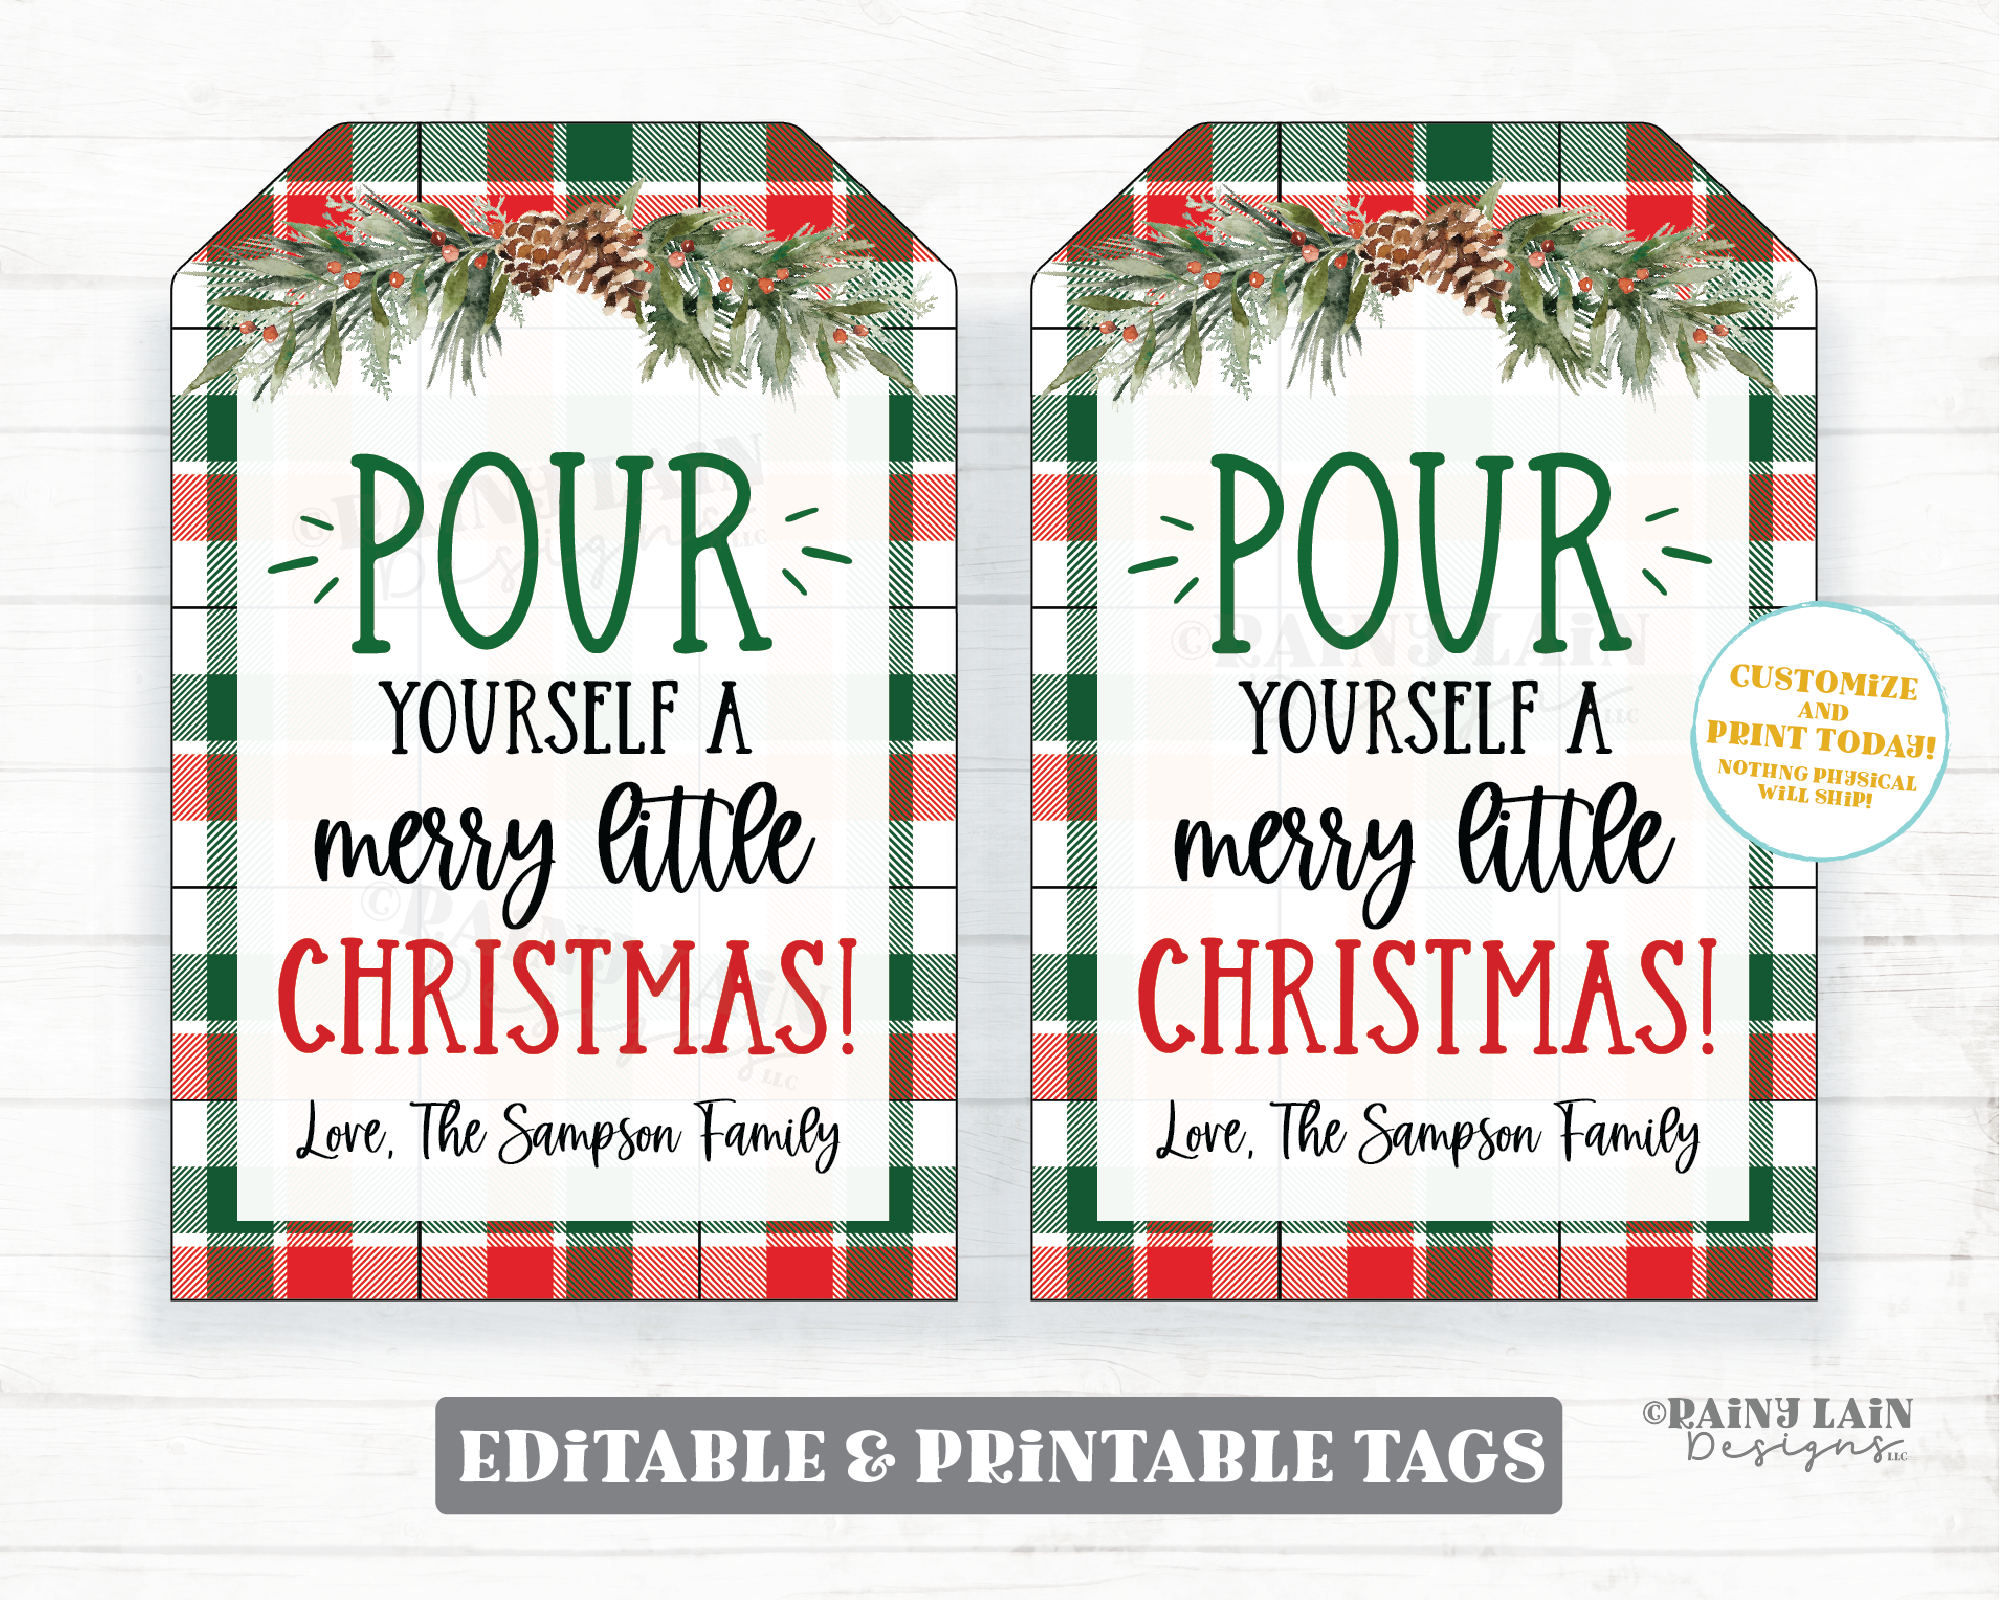 Pour Yourself a Merry Little Christmas Gift Tags Wine Beer Drink Spirits Liquor Holiday Tag Co-Worker Staff Teacher Plaid Christmas tags